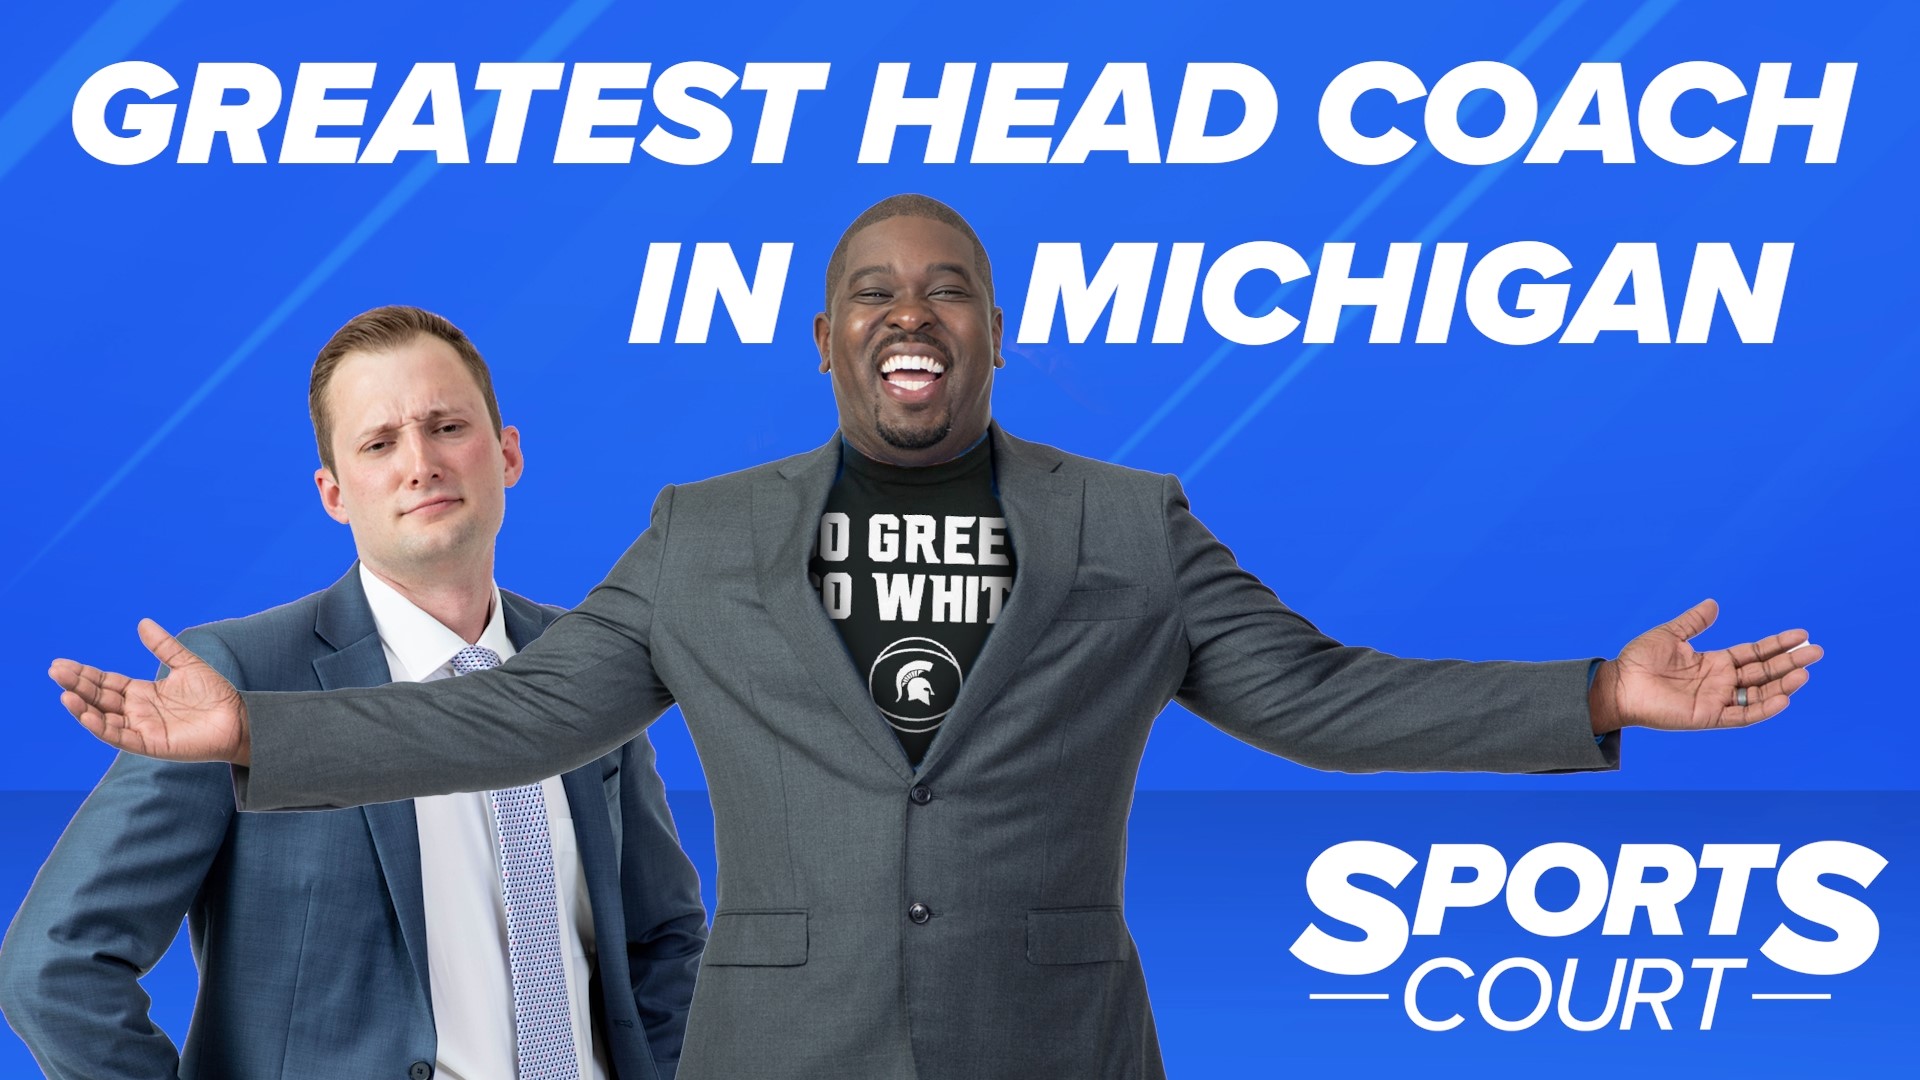 In Jamal's final Sports Court, he and Mark tackle who is the greatest head coach of any sport in the state of Michigan, ending in an explosive finale.